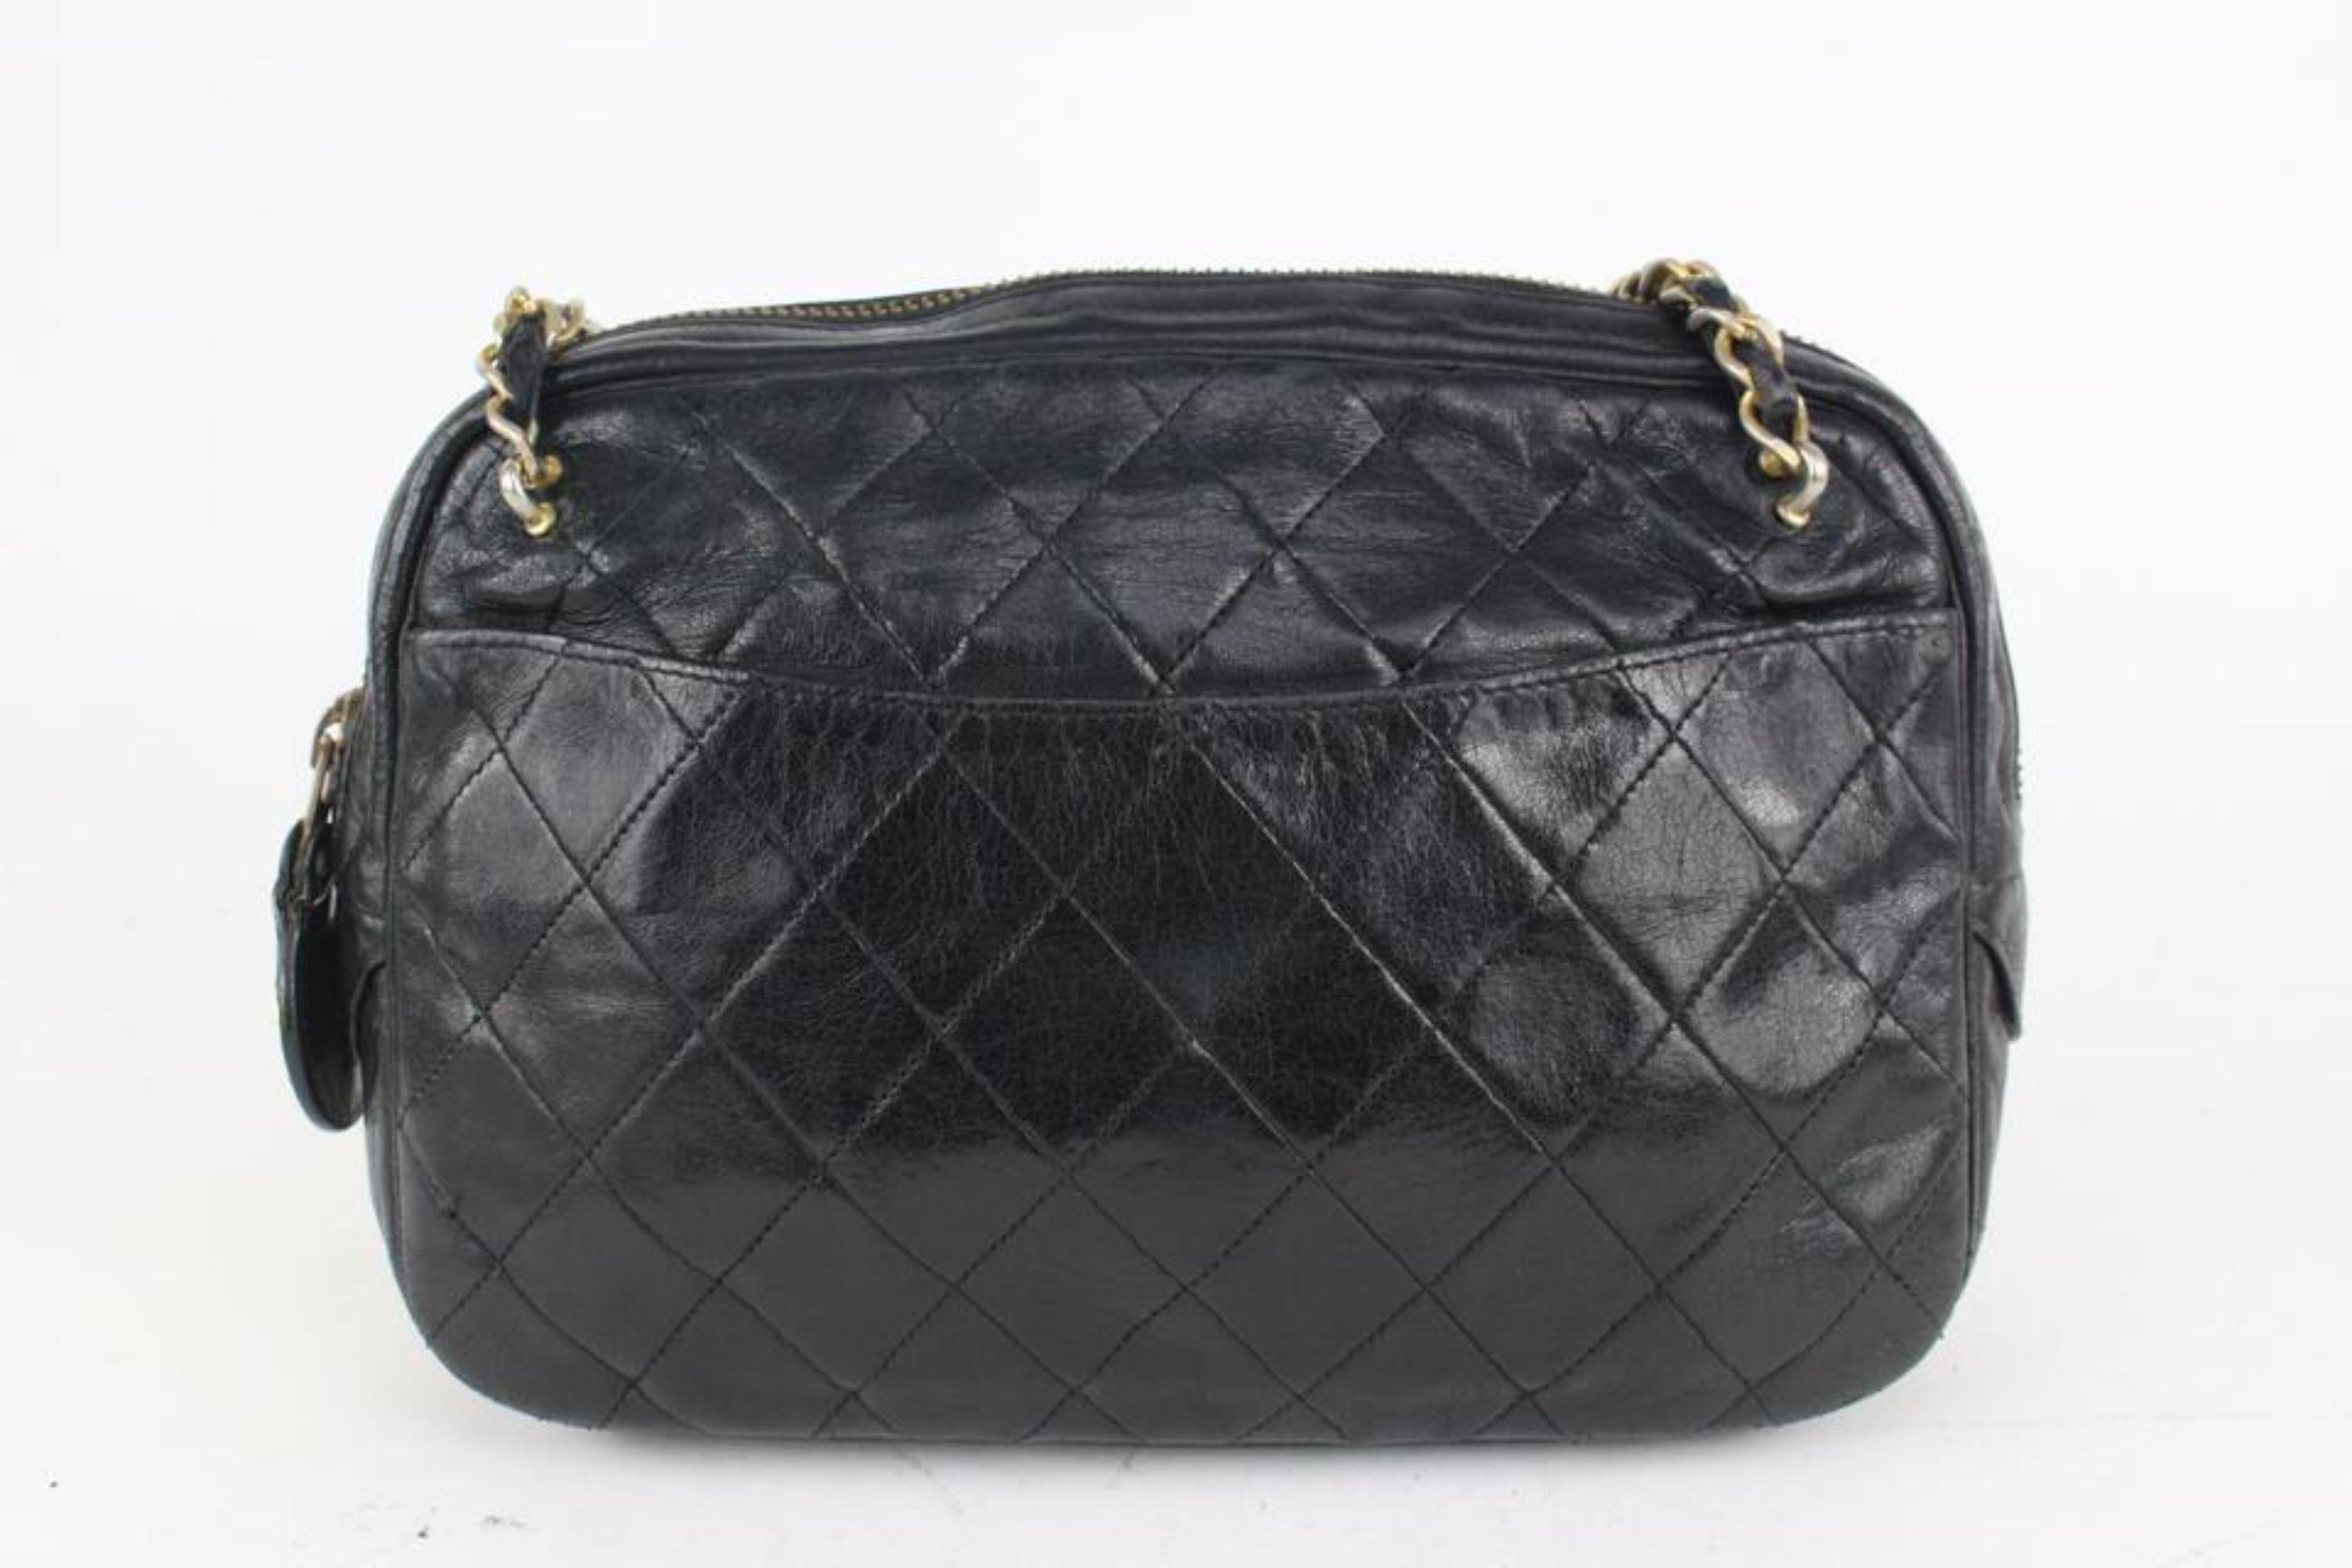 Chanel Black Quilted Lambskin Camera Bag Gold Chain 1014c7 For Sale 3